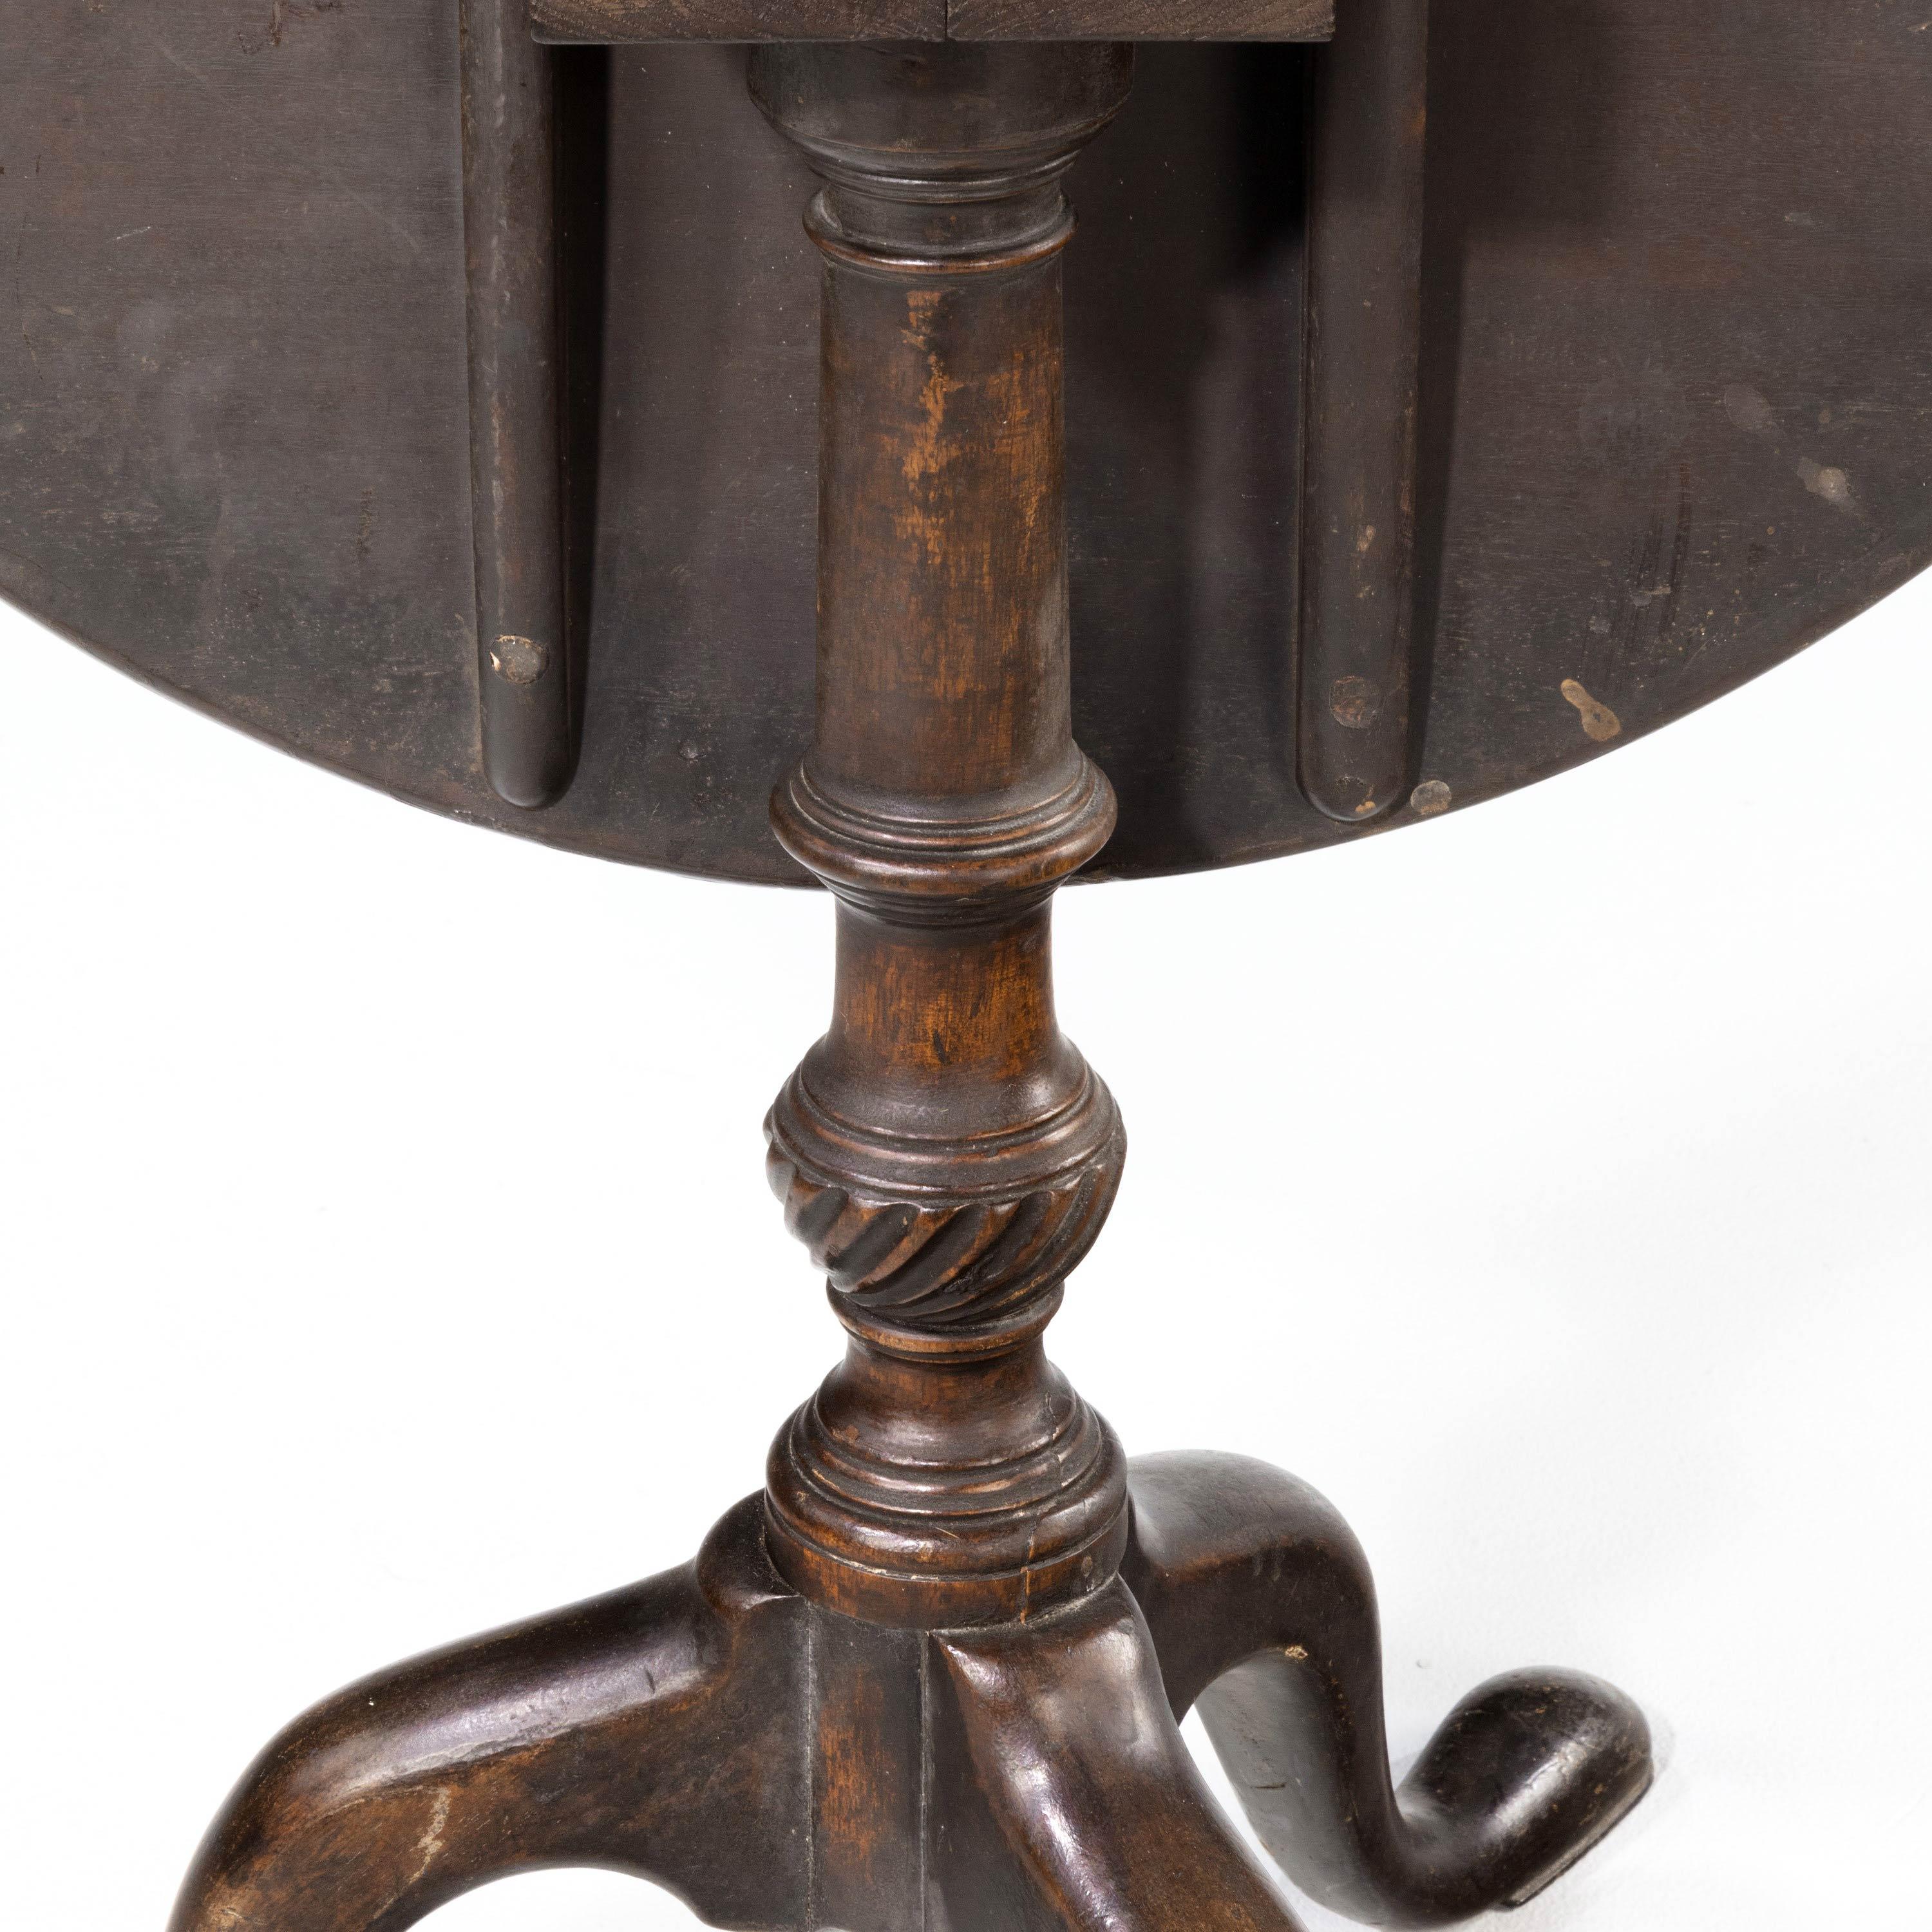 A good George III period mahogany tripod table. A circular top upon a turned and cast stem with three down swept legs. Excellent original color and patina.
  